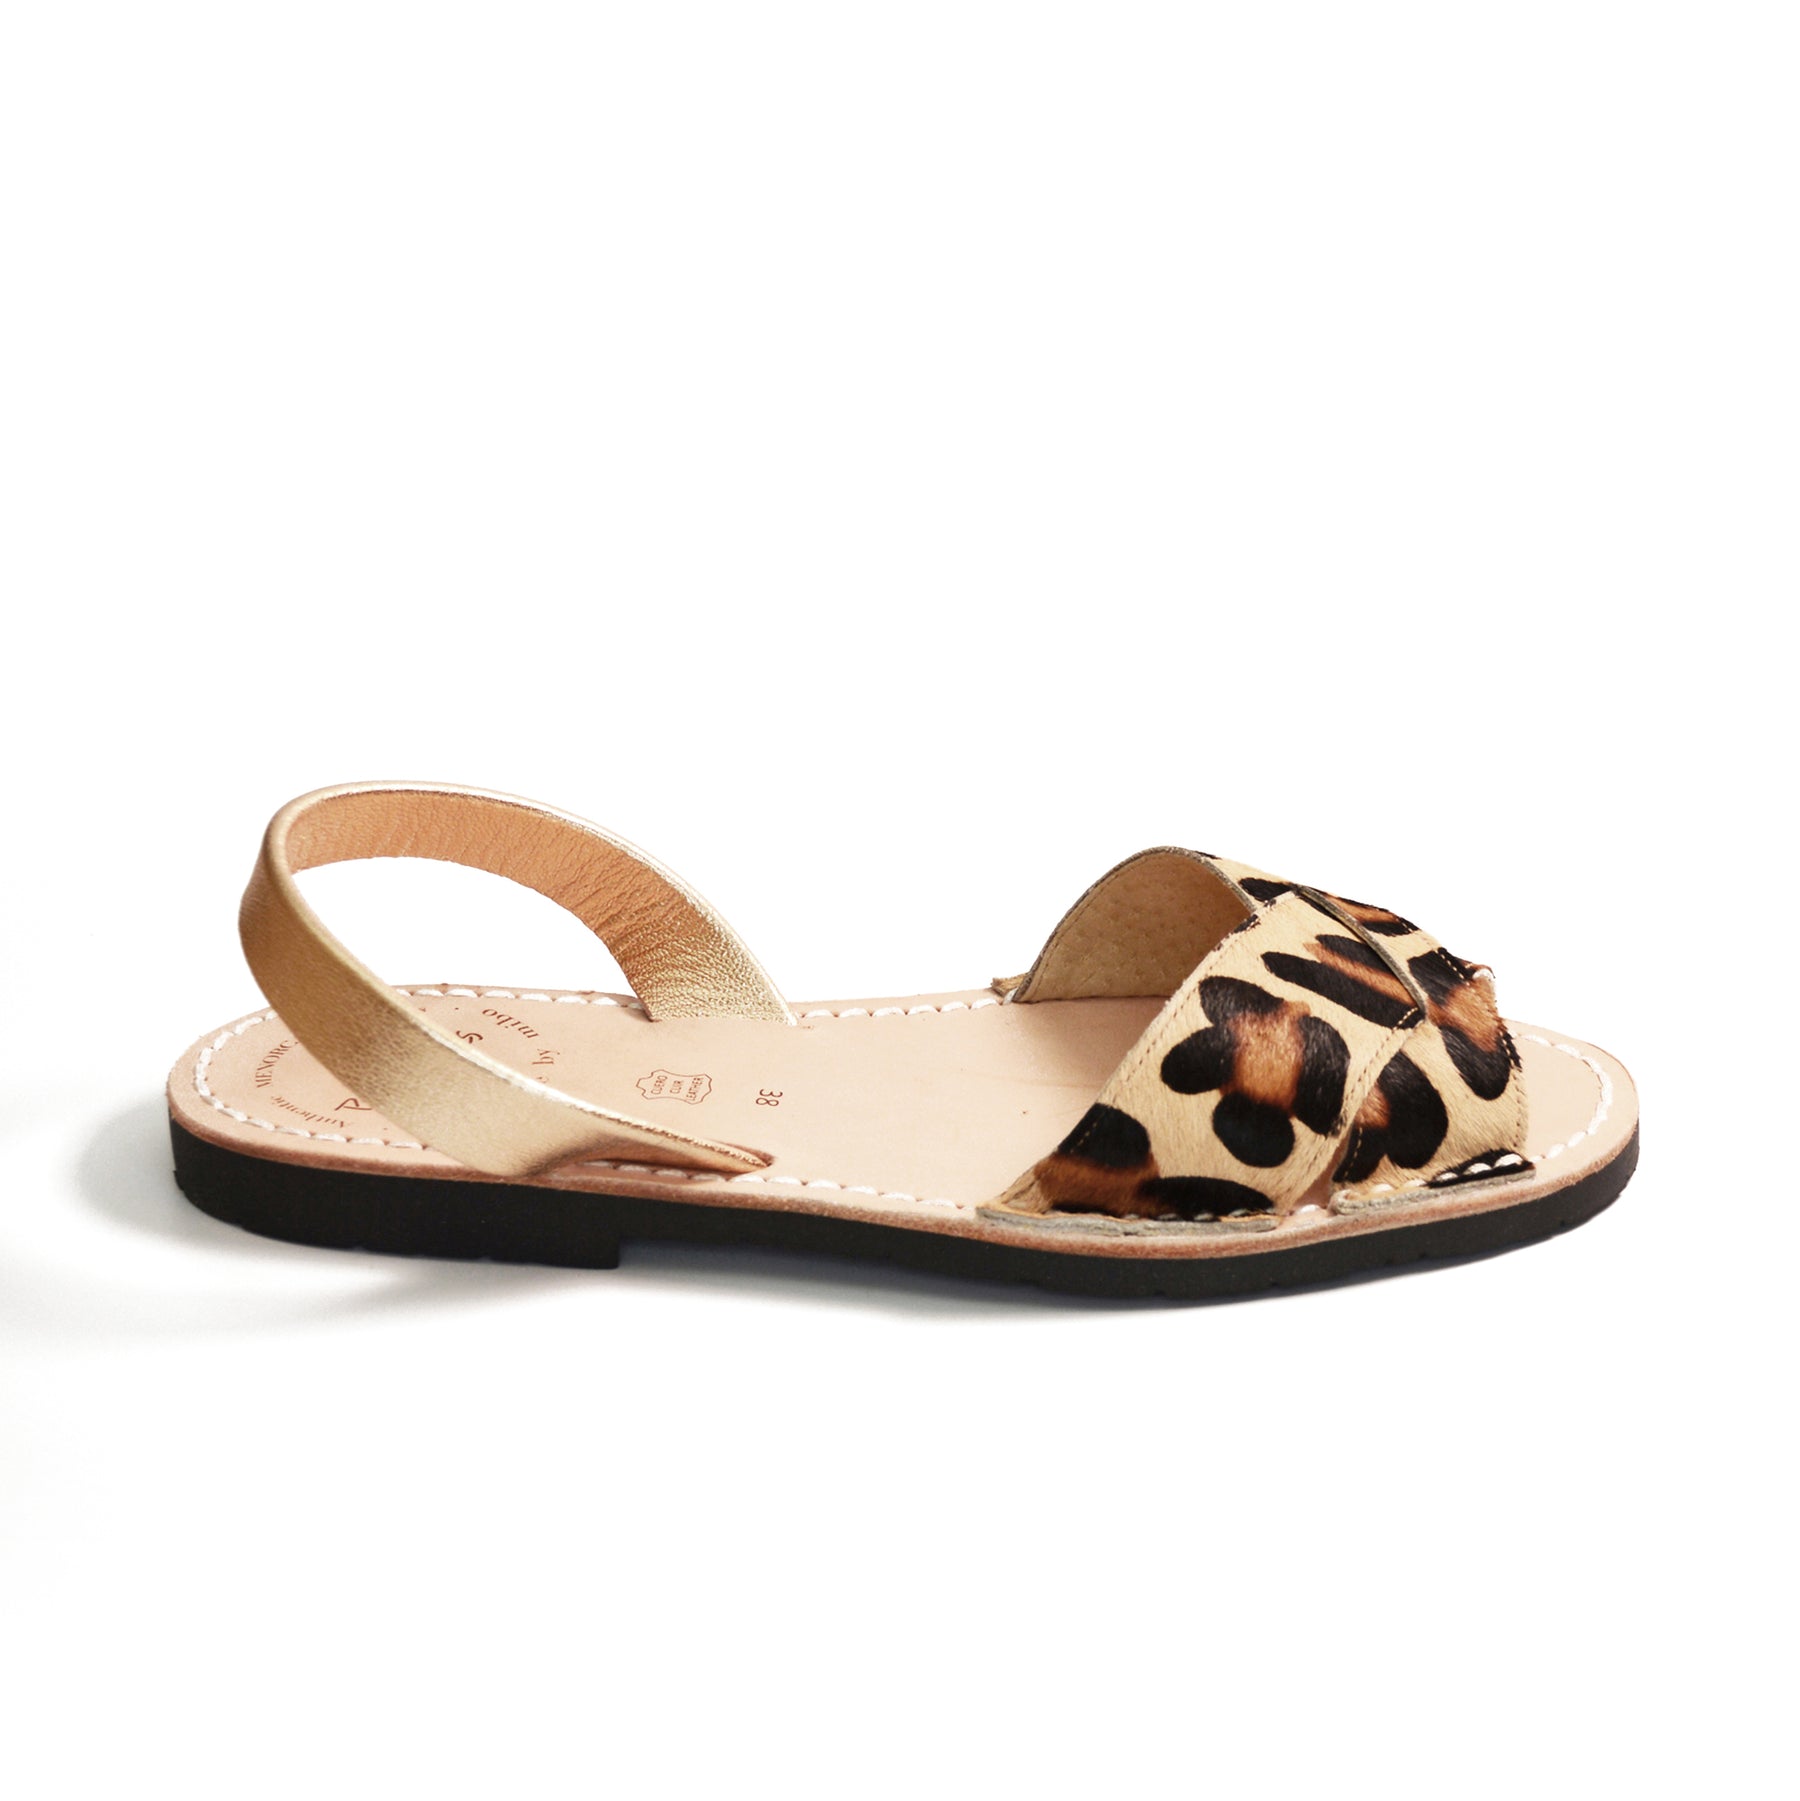 LEOPARD PRINT WITH IVORY GOLD STRAP MENORCAN AVARCAS SANDALS